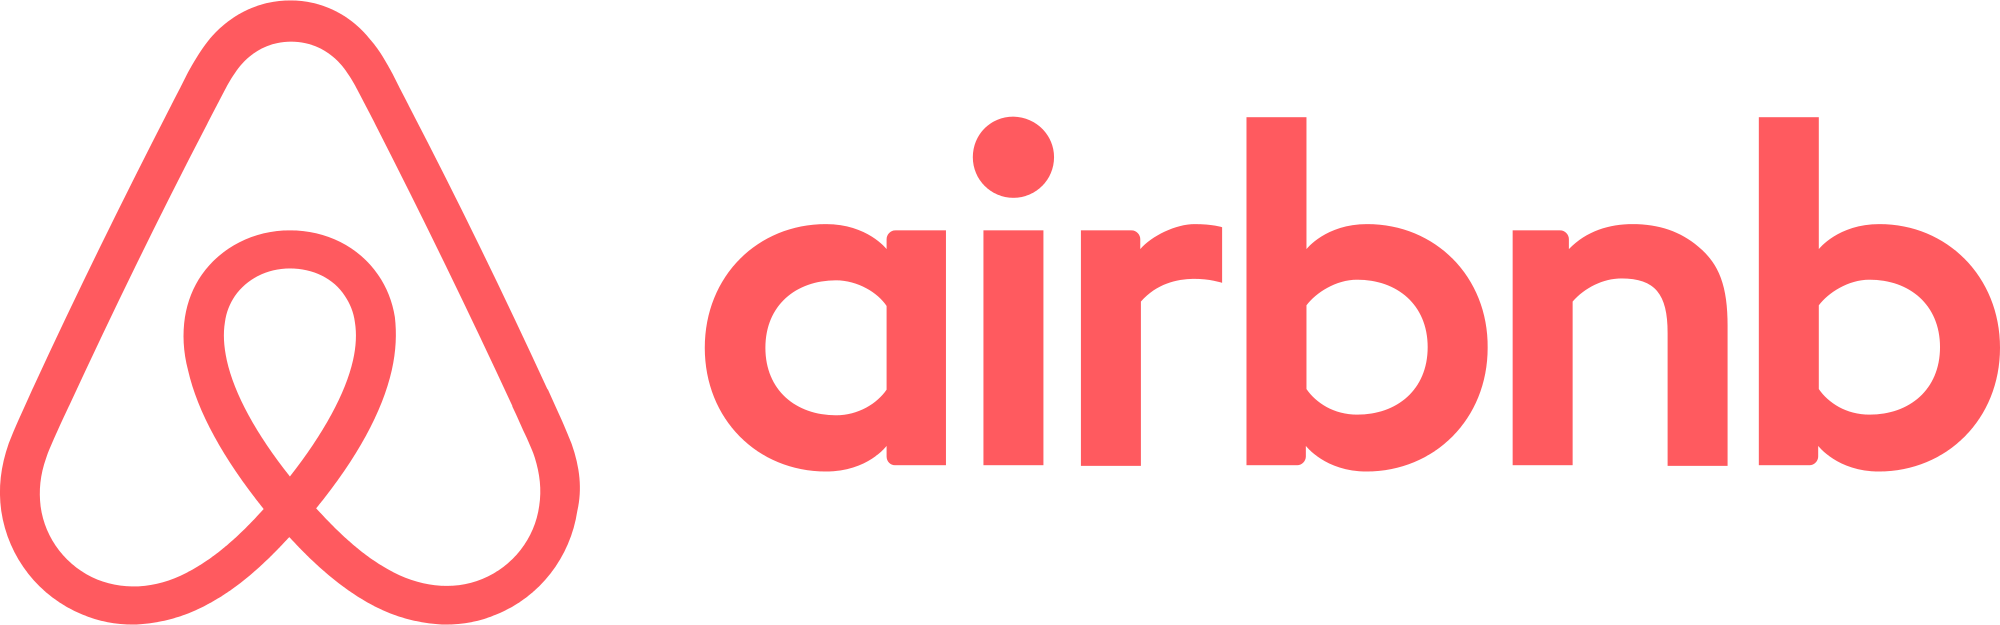 Open Hdpng.com  - Airbnb, Transparent background PNG HD thumbnail